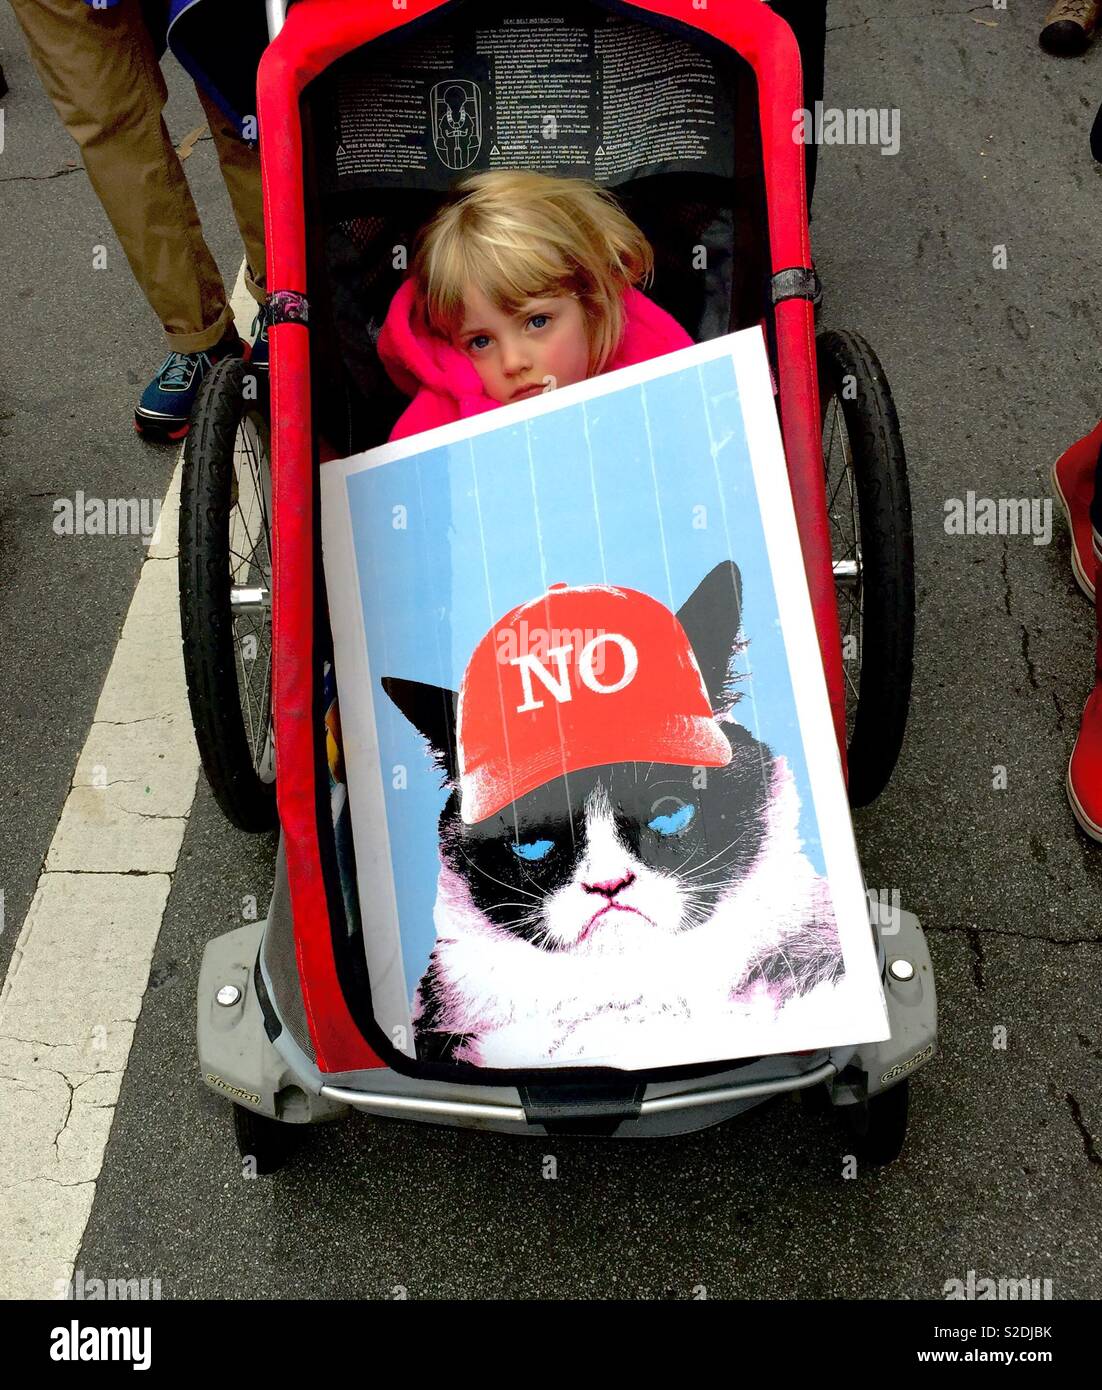 Tired blonde child in stroller behind a protest sign of Grumpy Cat wearing a red baseball cap that says NO, instead of a MAGA hat. Women’s March 2017. Oakland, California, USA Stock Photo